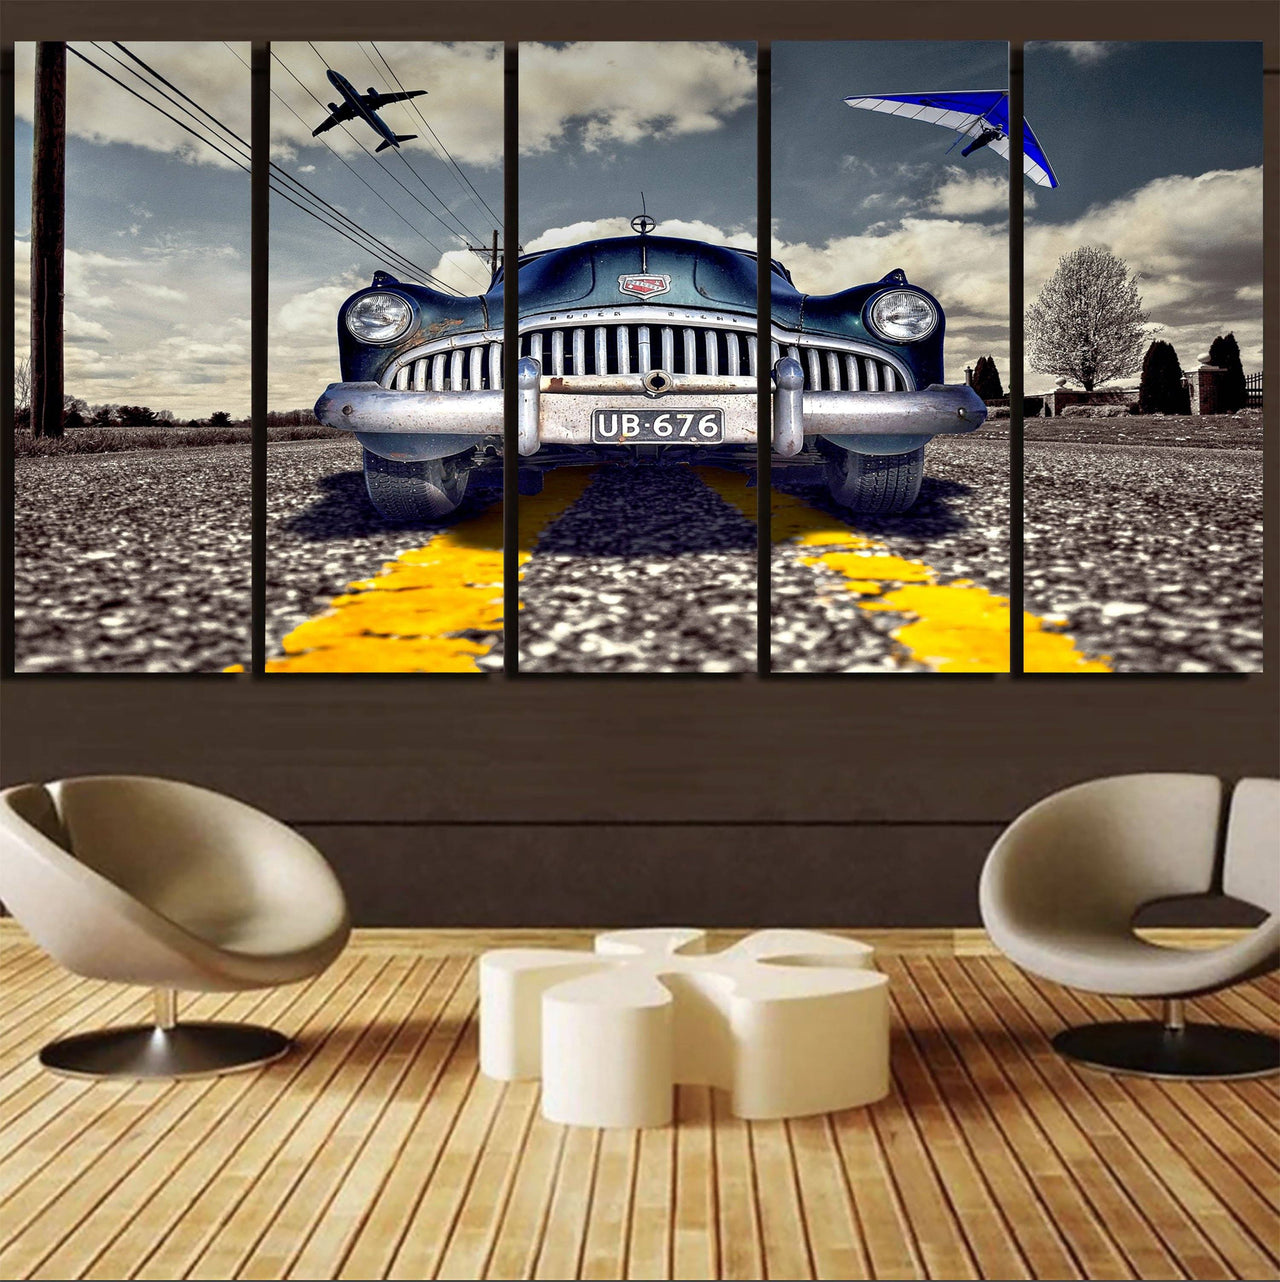 Old Car and Planes Printed Canvas Prints (5 Pieces) Aviation Shop 